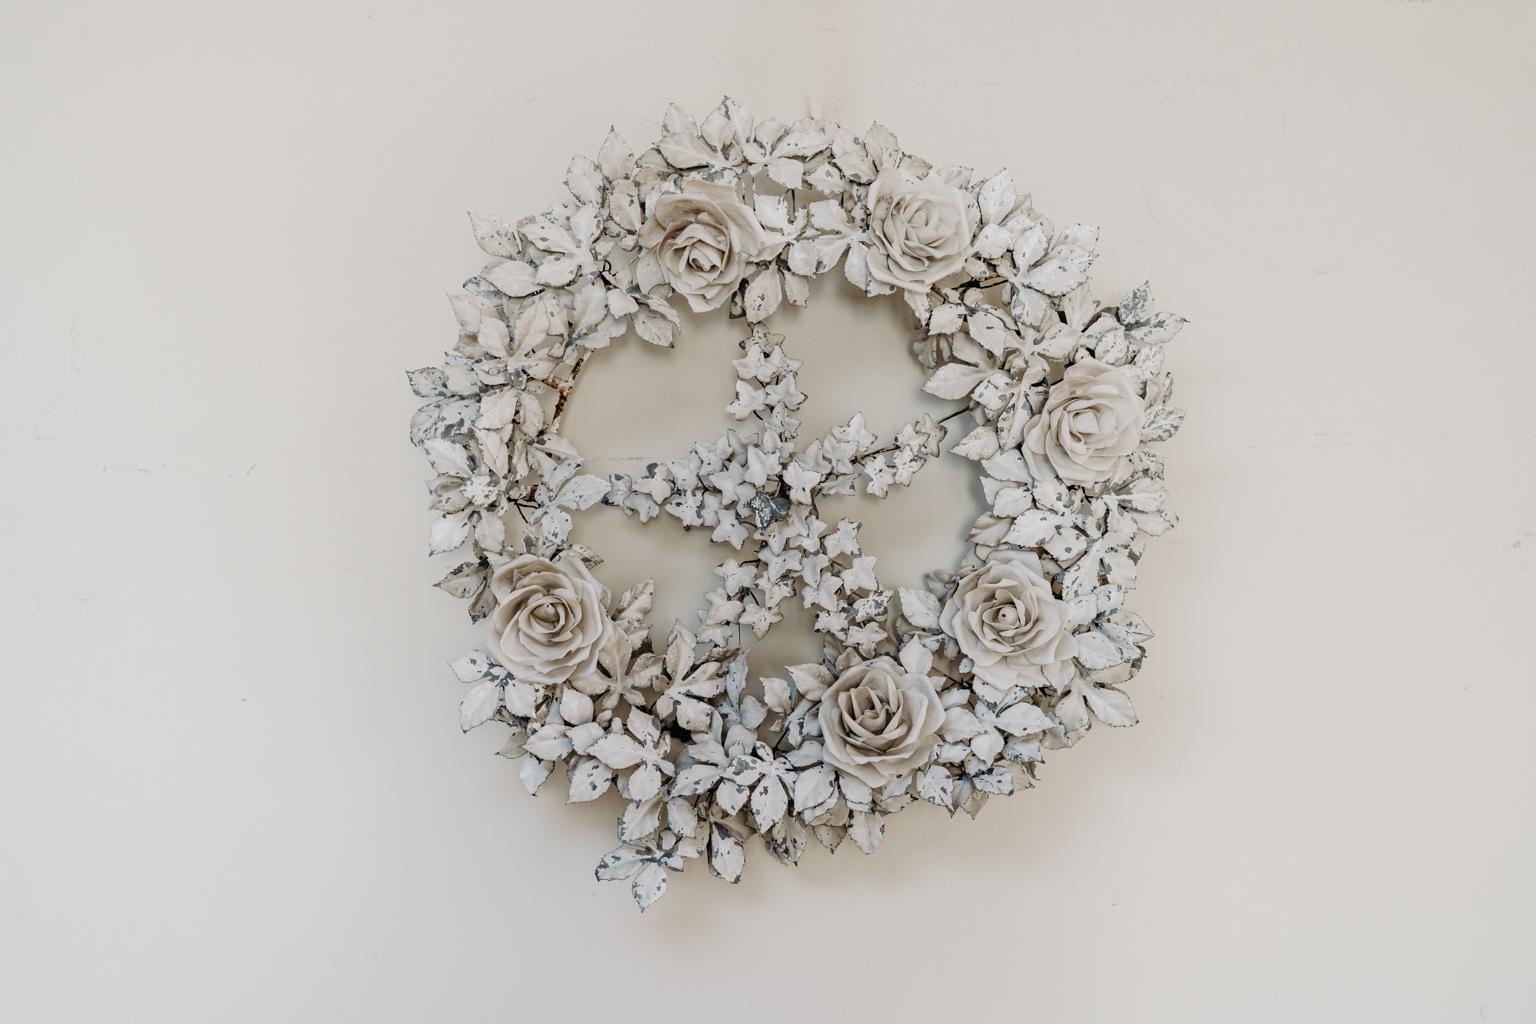 For zinc lovers, a mid 19th century zinc/metal hand painted flower crown.